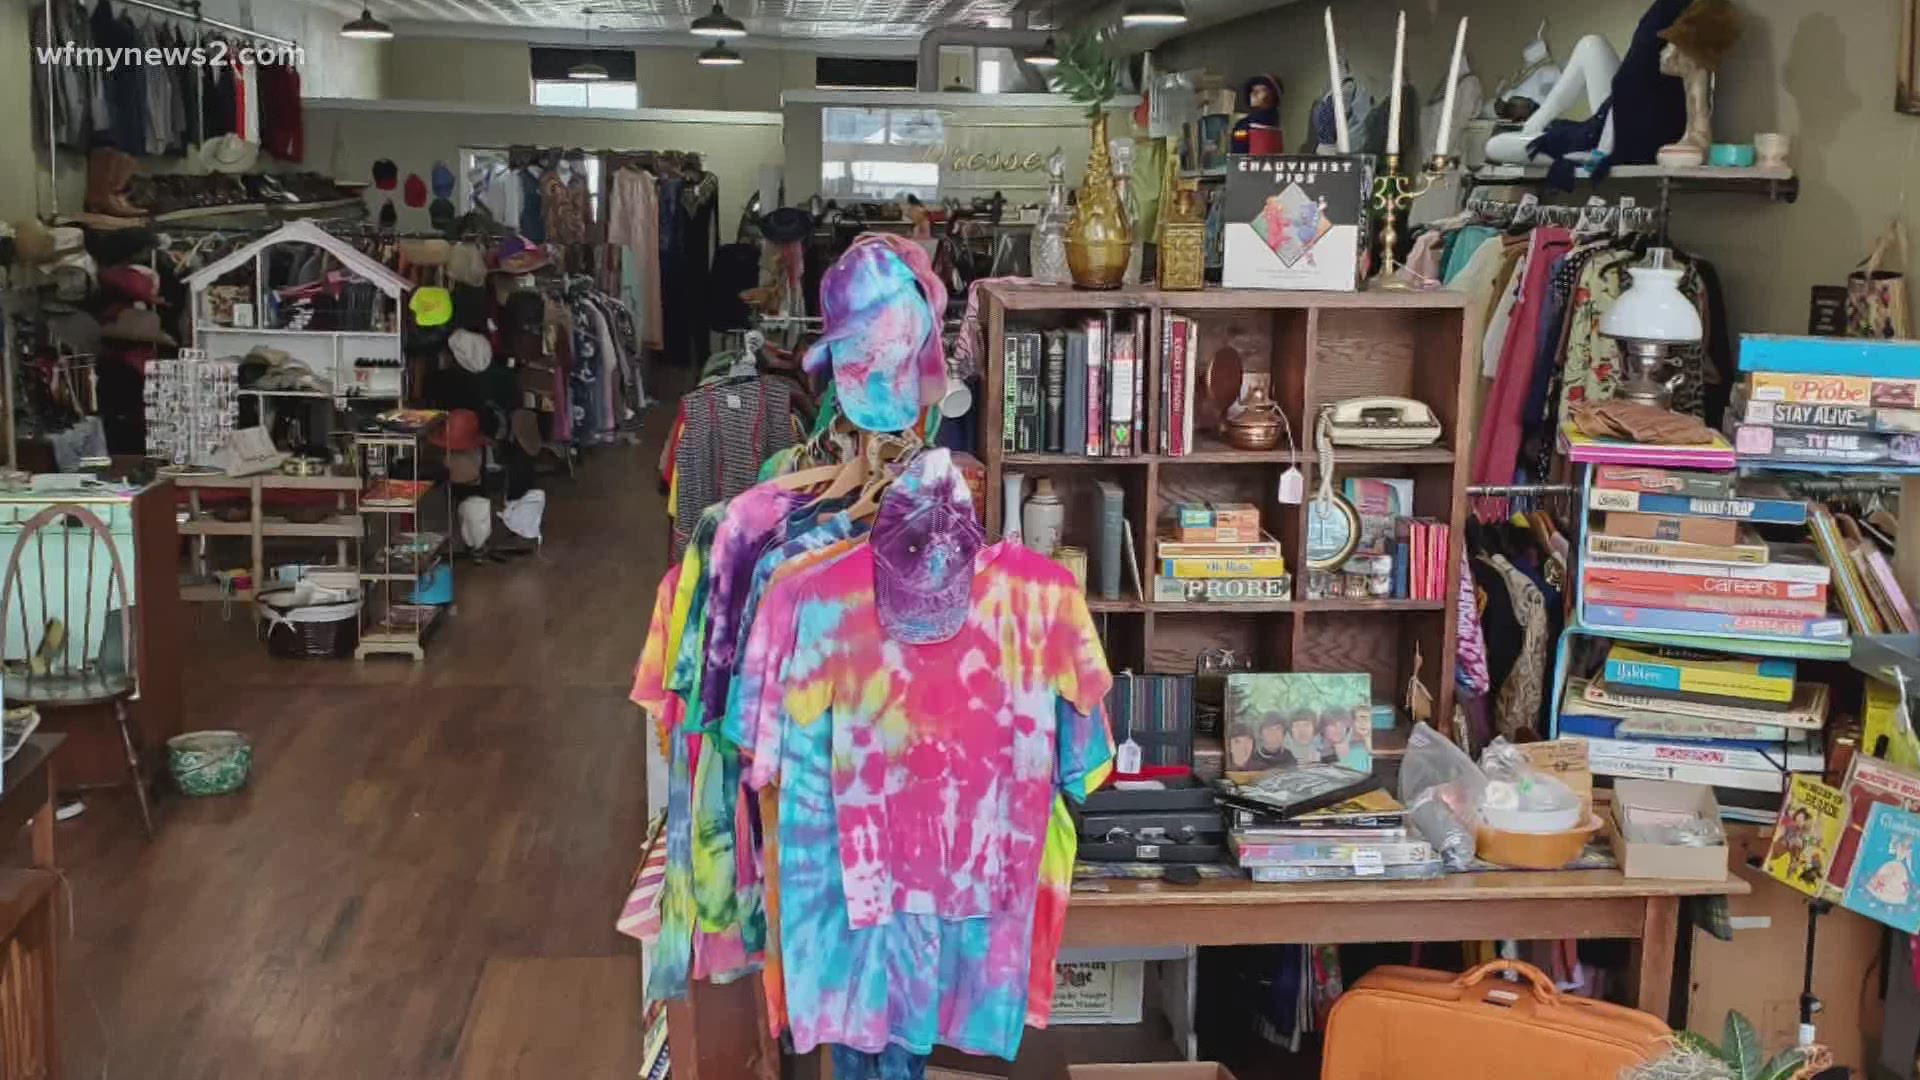 Mount Airy has a hidden vintage boutique that could take you back in time. Groovy Goose sells retro items from the 1960s and ’70s.